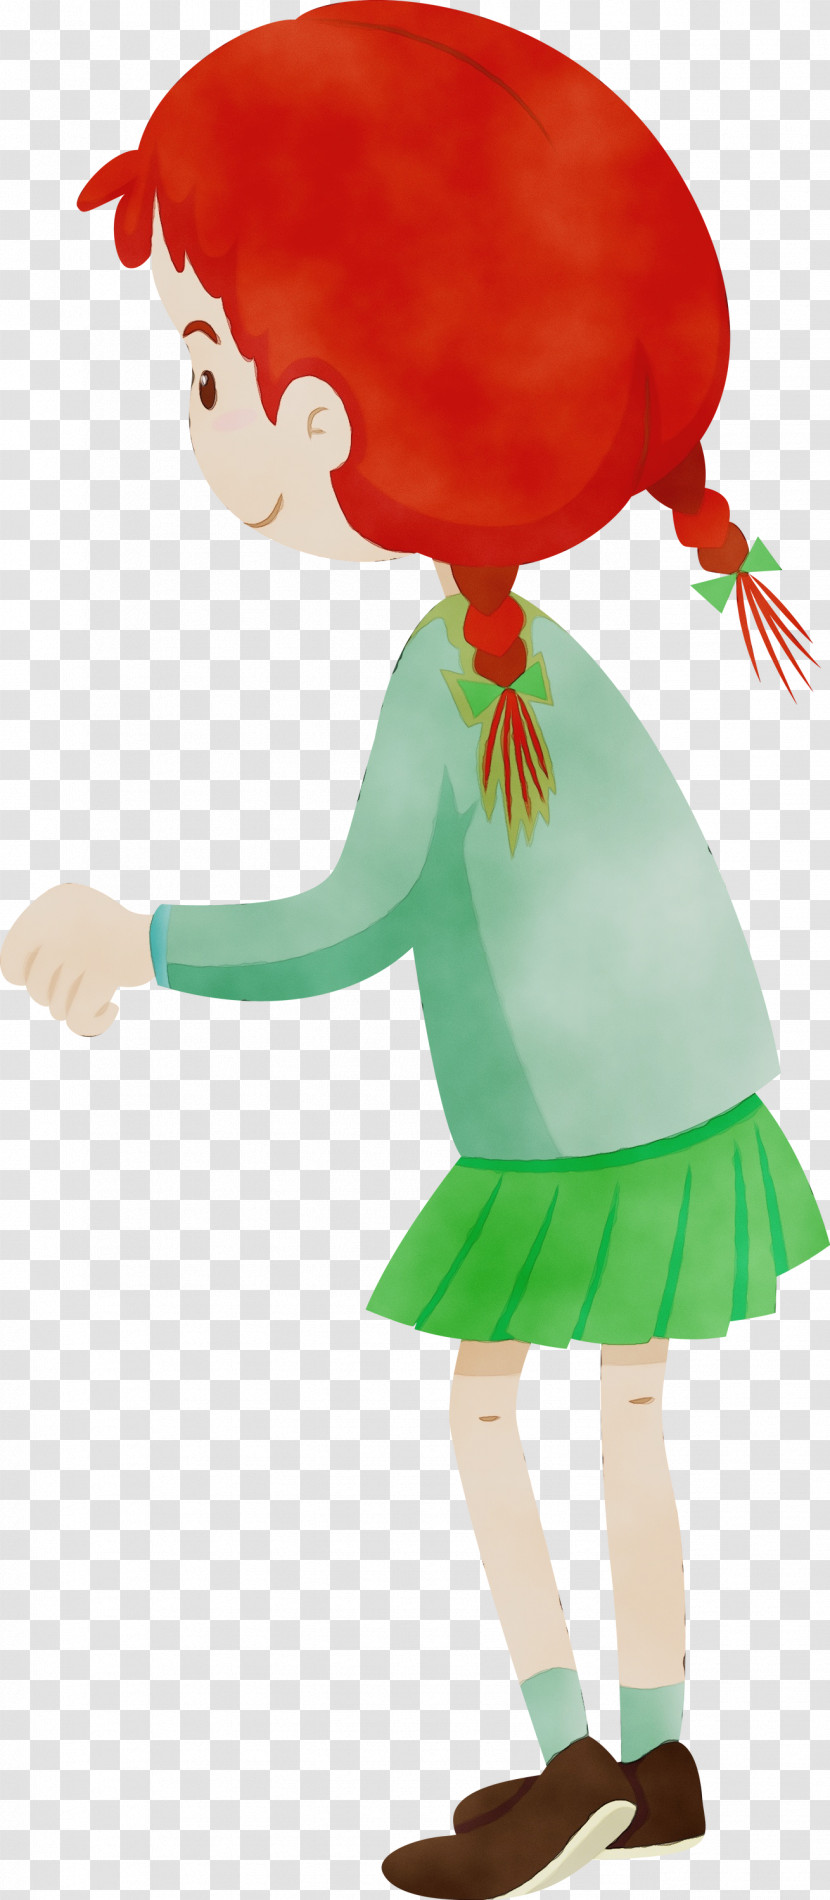 Joint Green Plants Figurine Science Transparent PNG